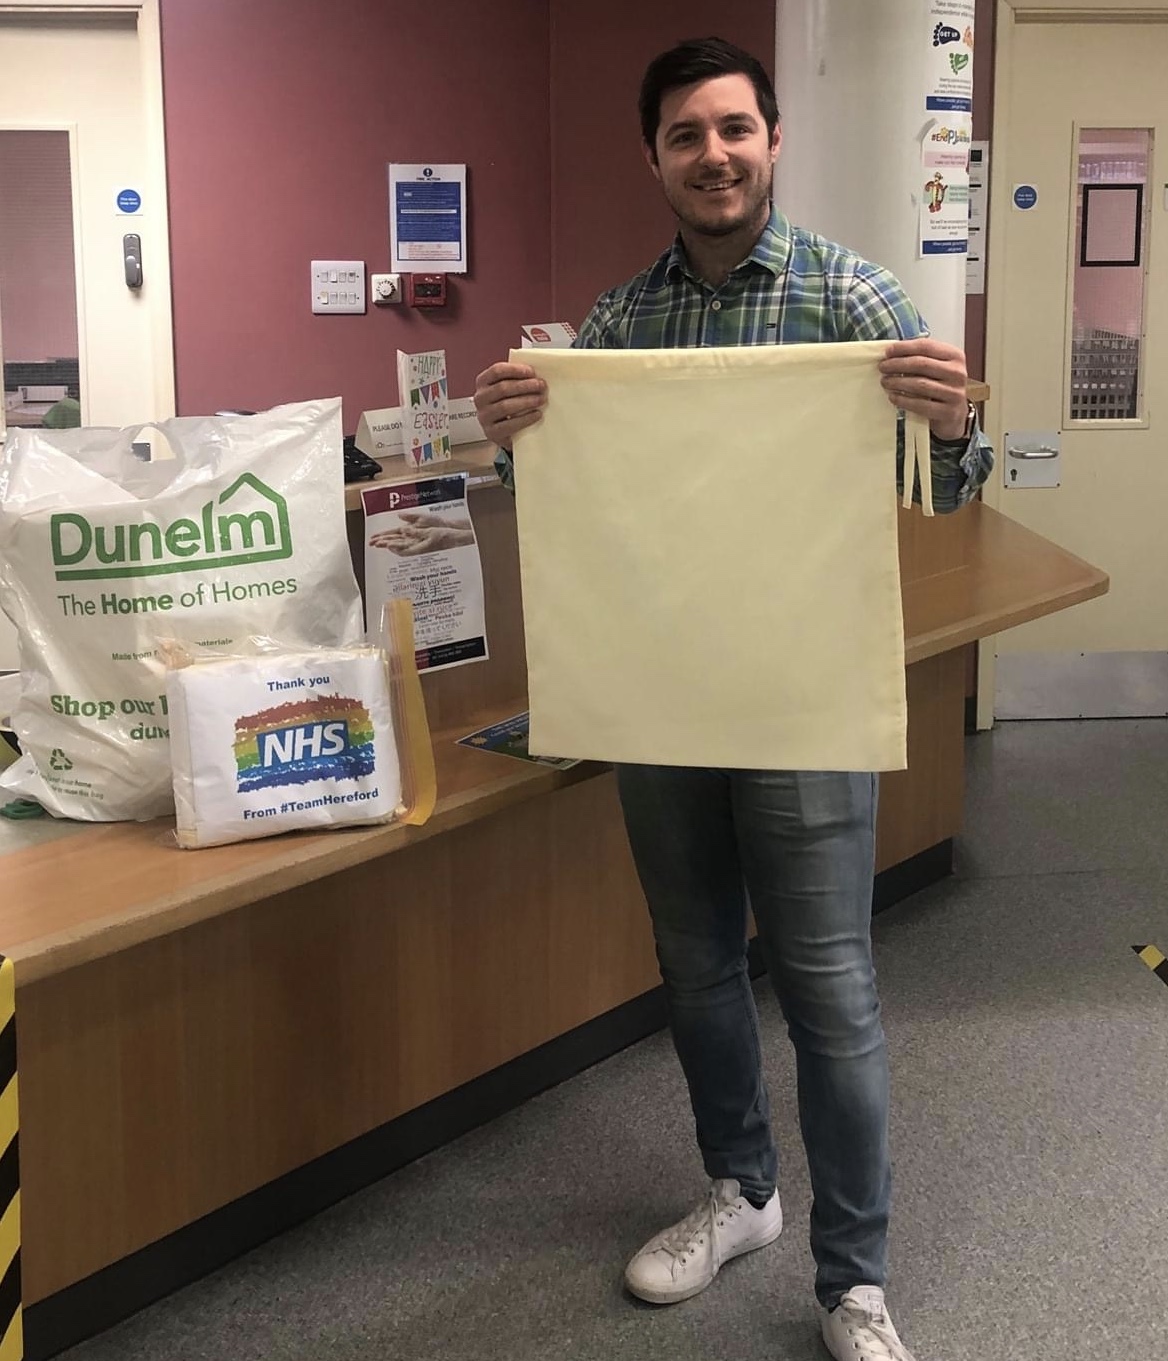 COMMUNITY | Dunelm provides laundry bags for NHS staff